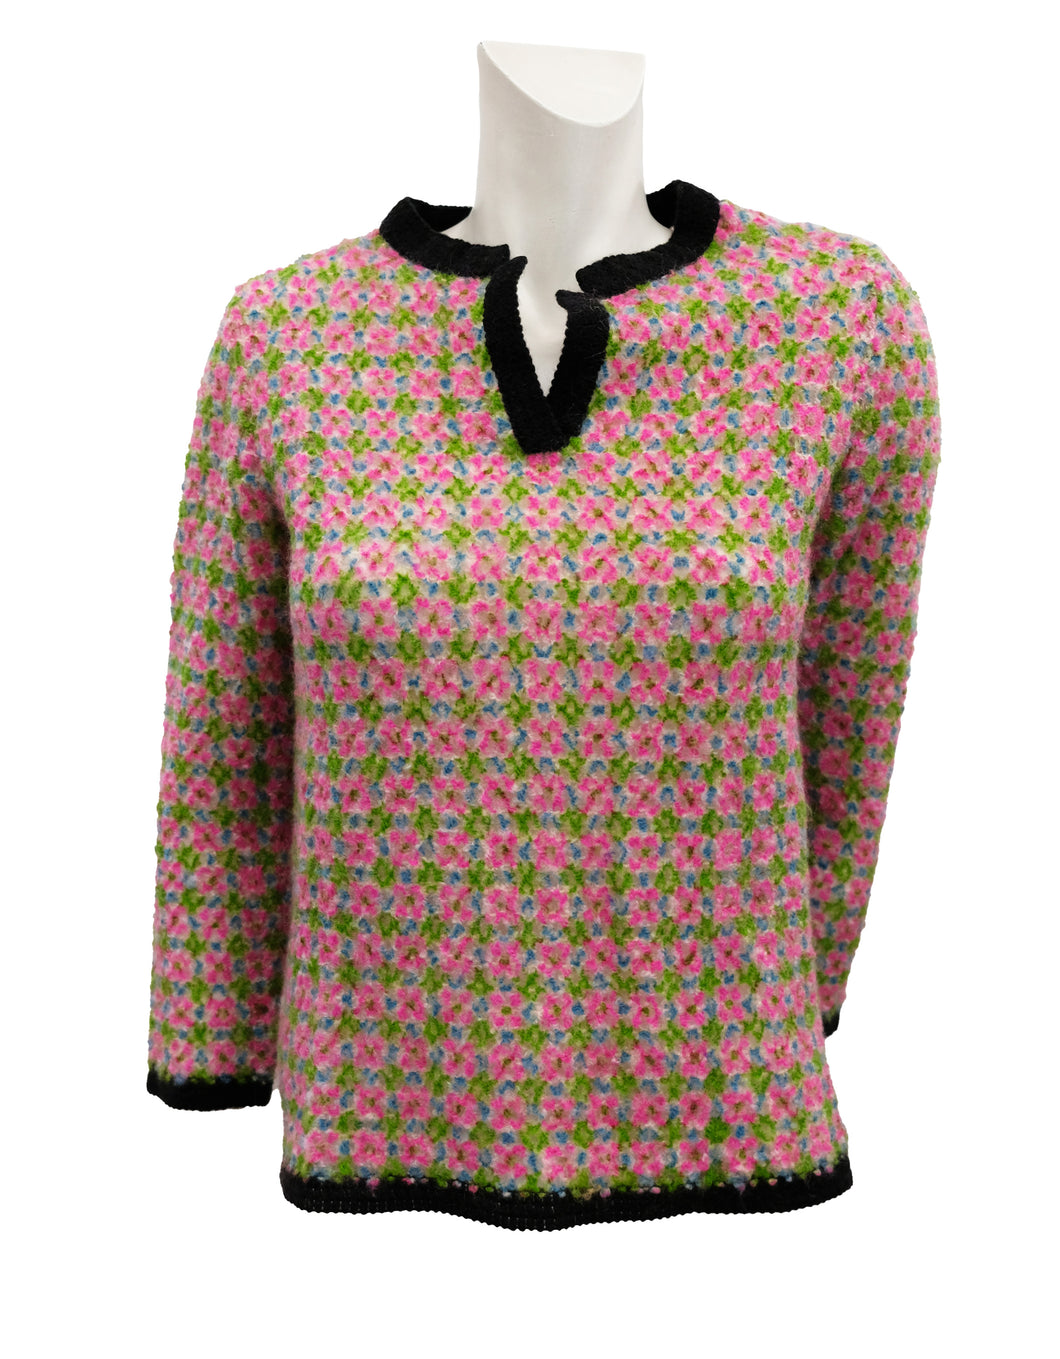 Nina Ricci Vintage Lacy Knit in Pink and Green, UK10